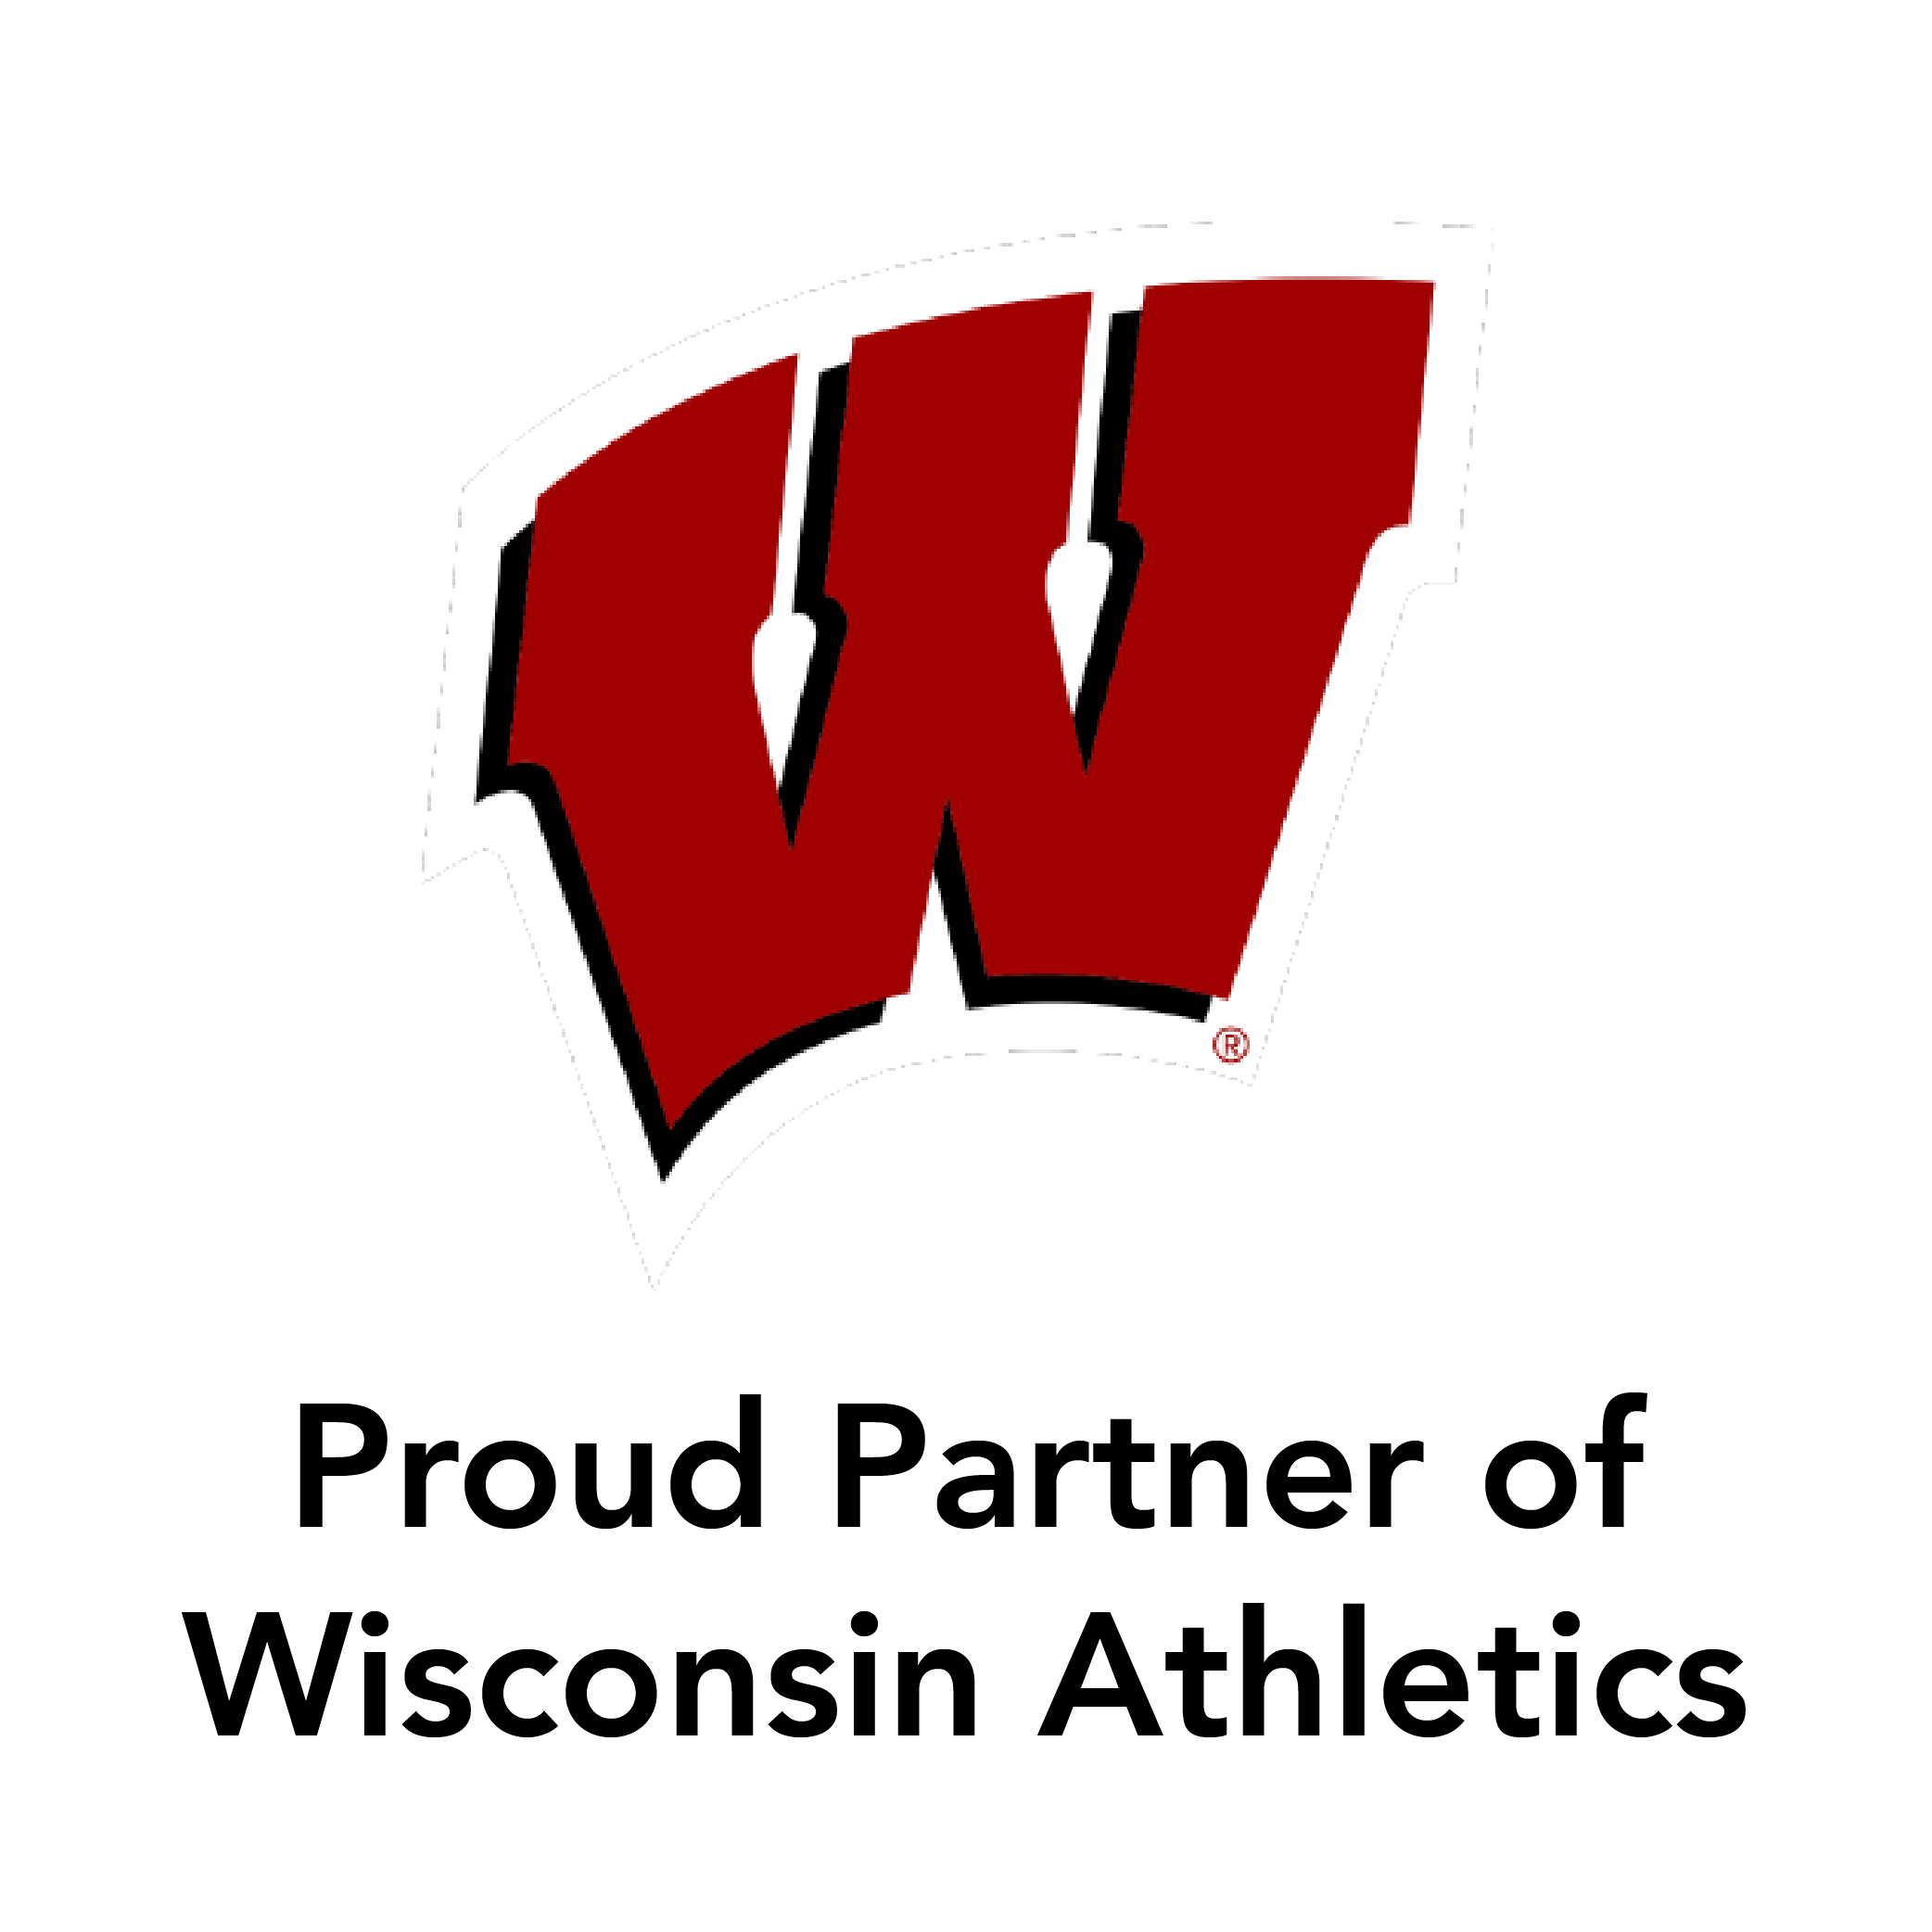 University of WI logo followed by the text "Proud Sponsor of Wisconsin Athletics"